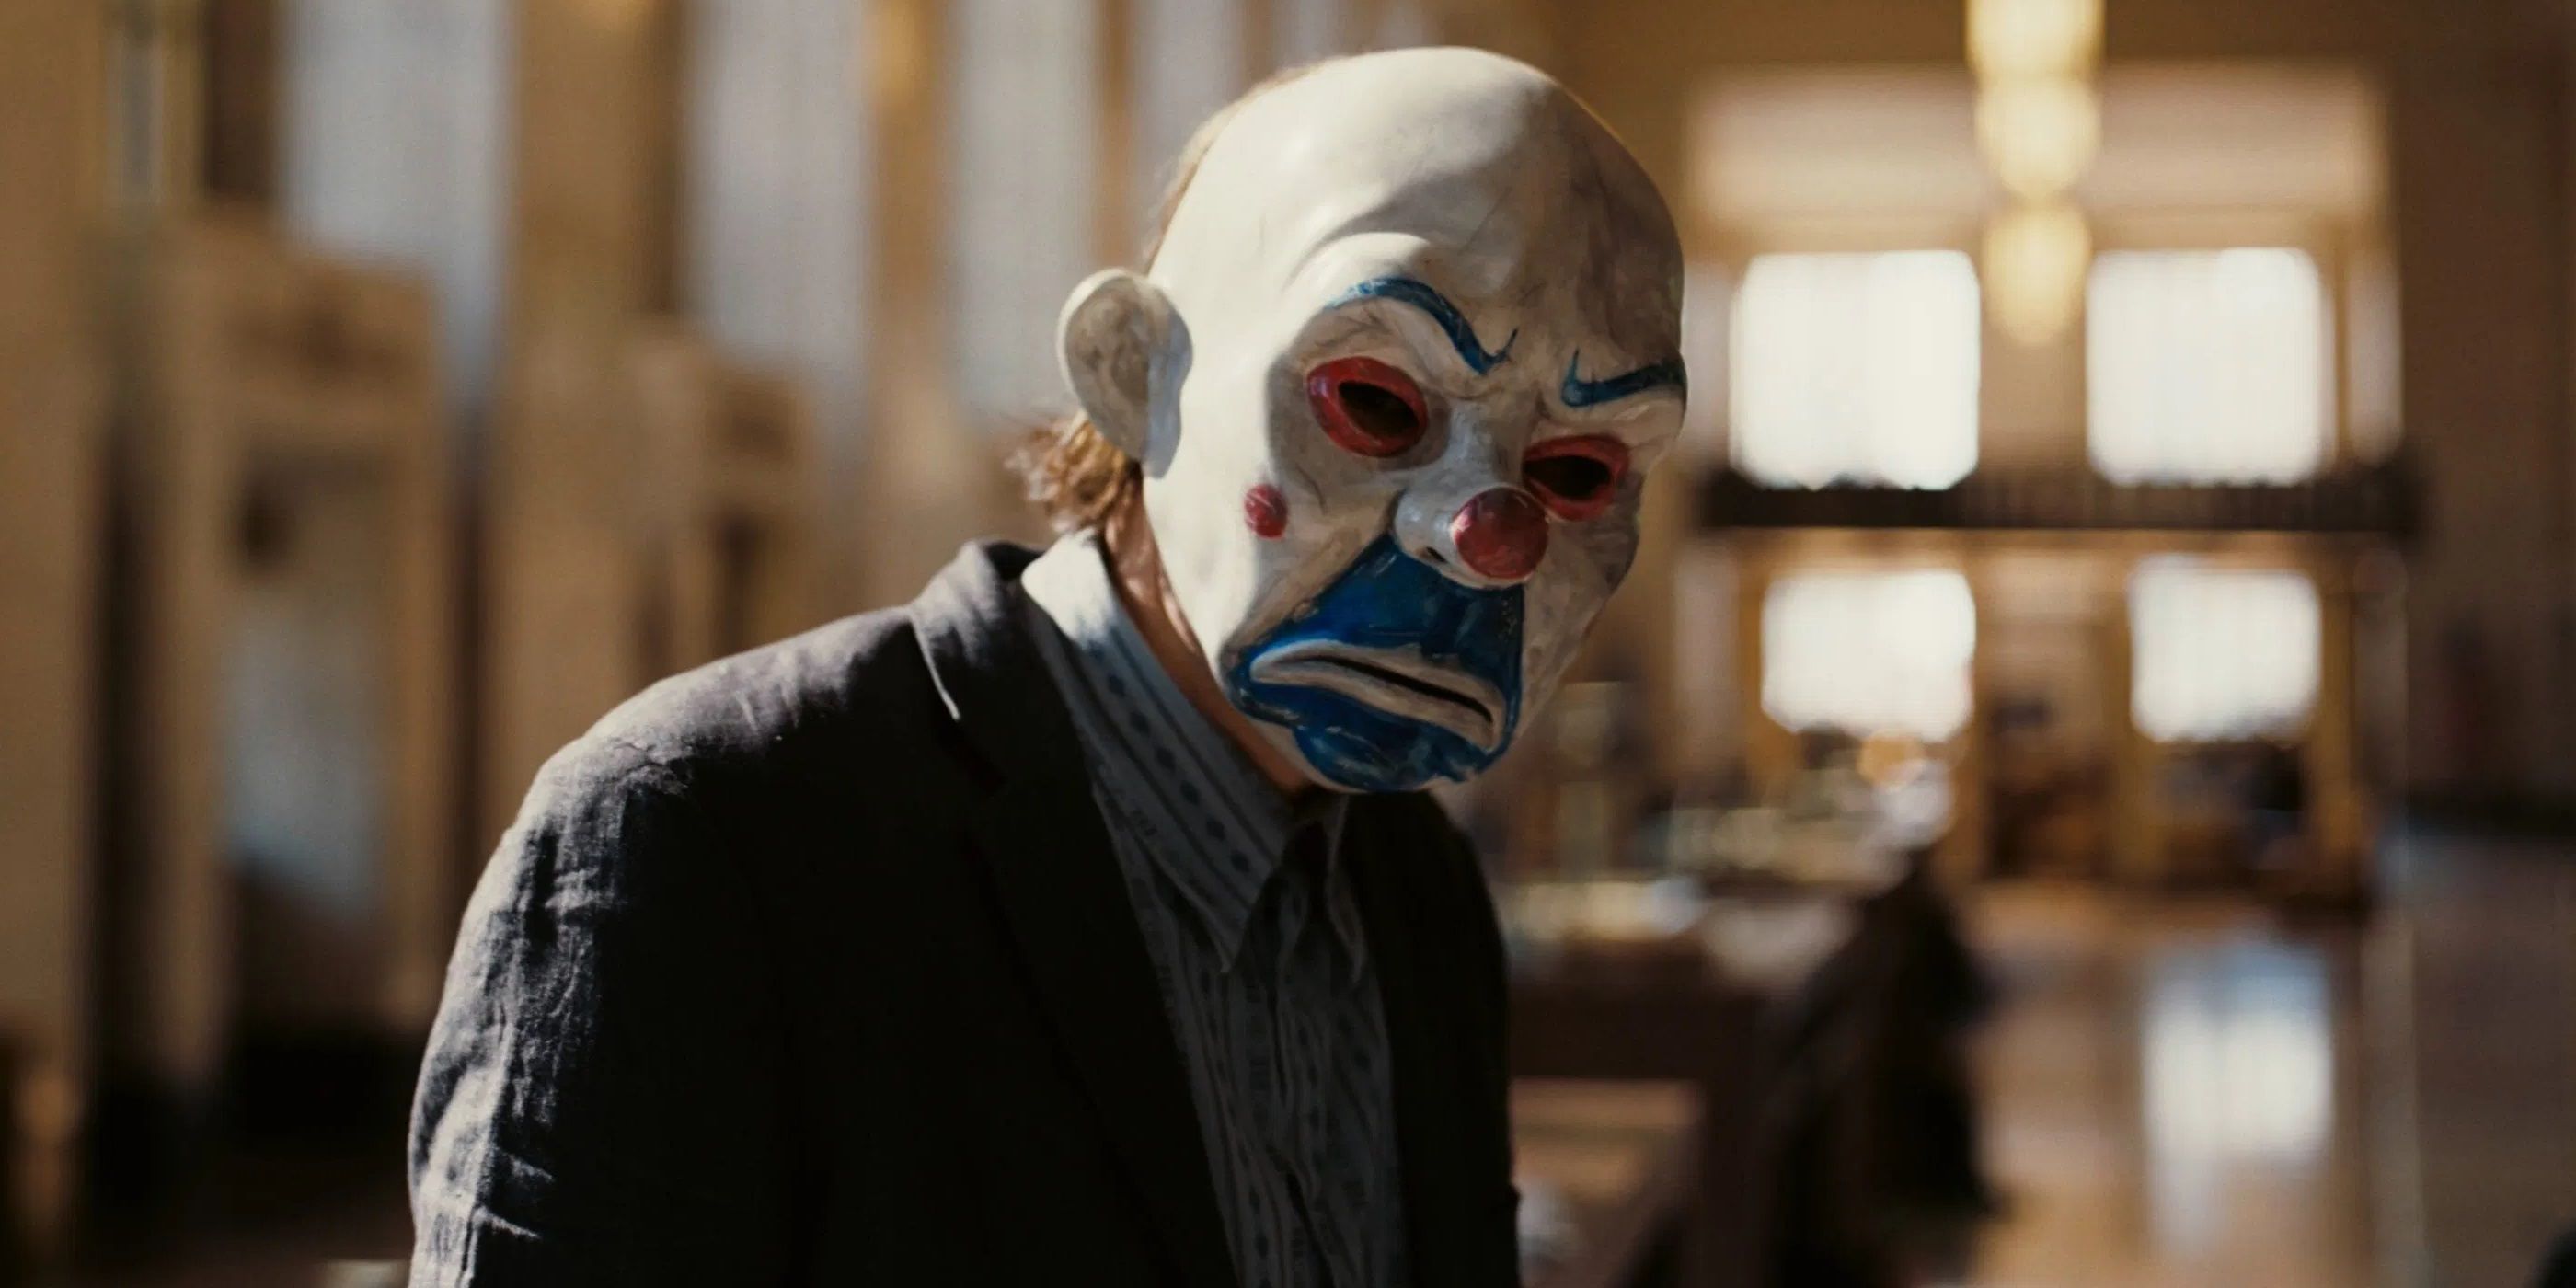 The Joker wearing a clown mask in the opening bank robbery scene of The Dark Knight